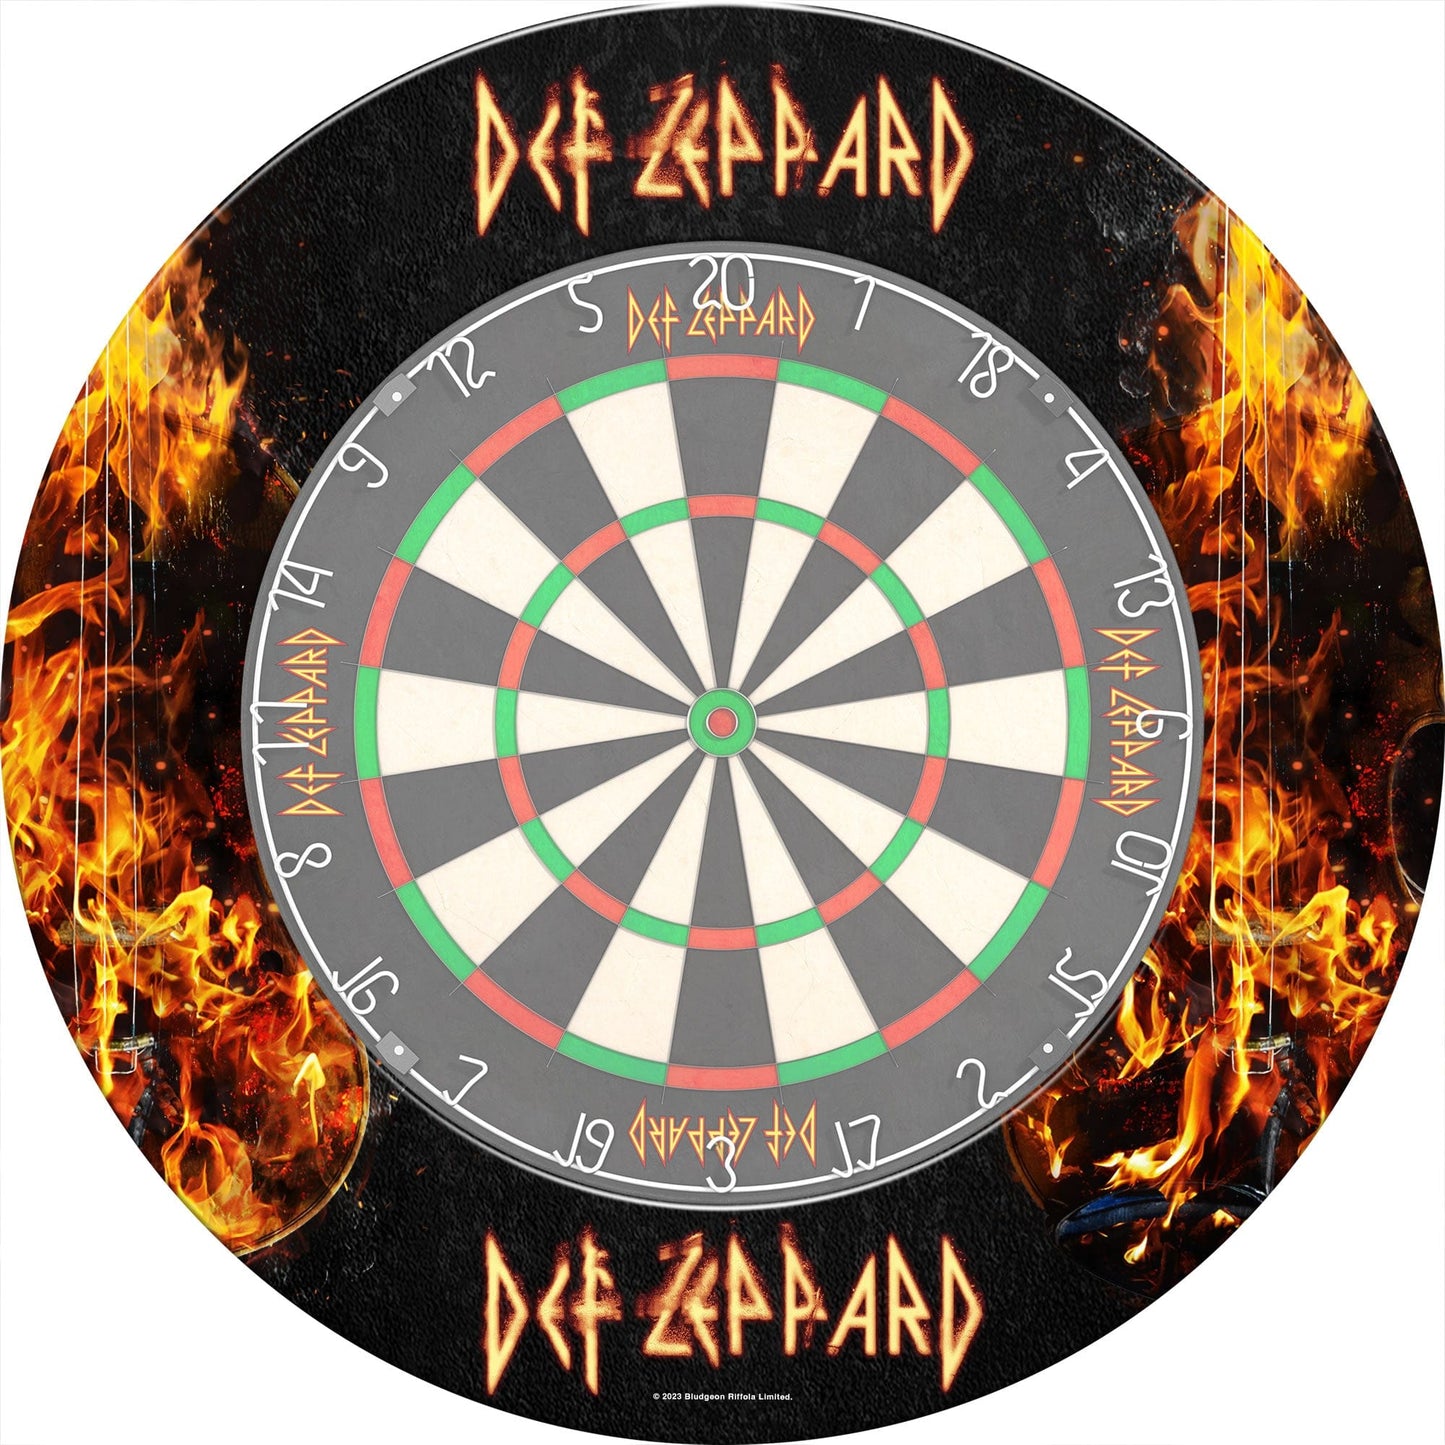 Def Leppard Dartboard Surround - Official Licensed - S4 - Professional - Flames